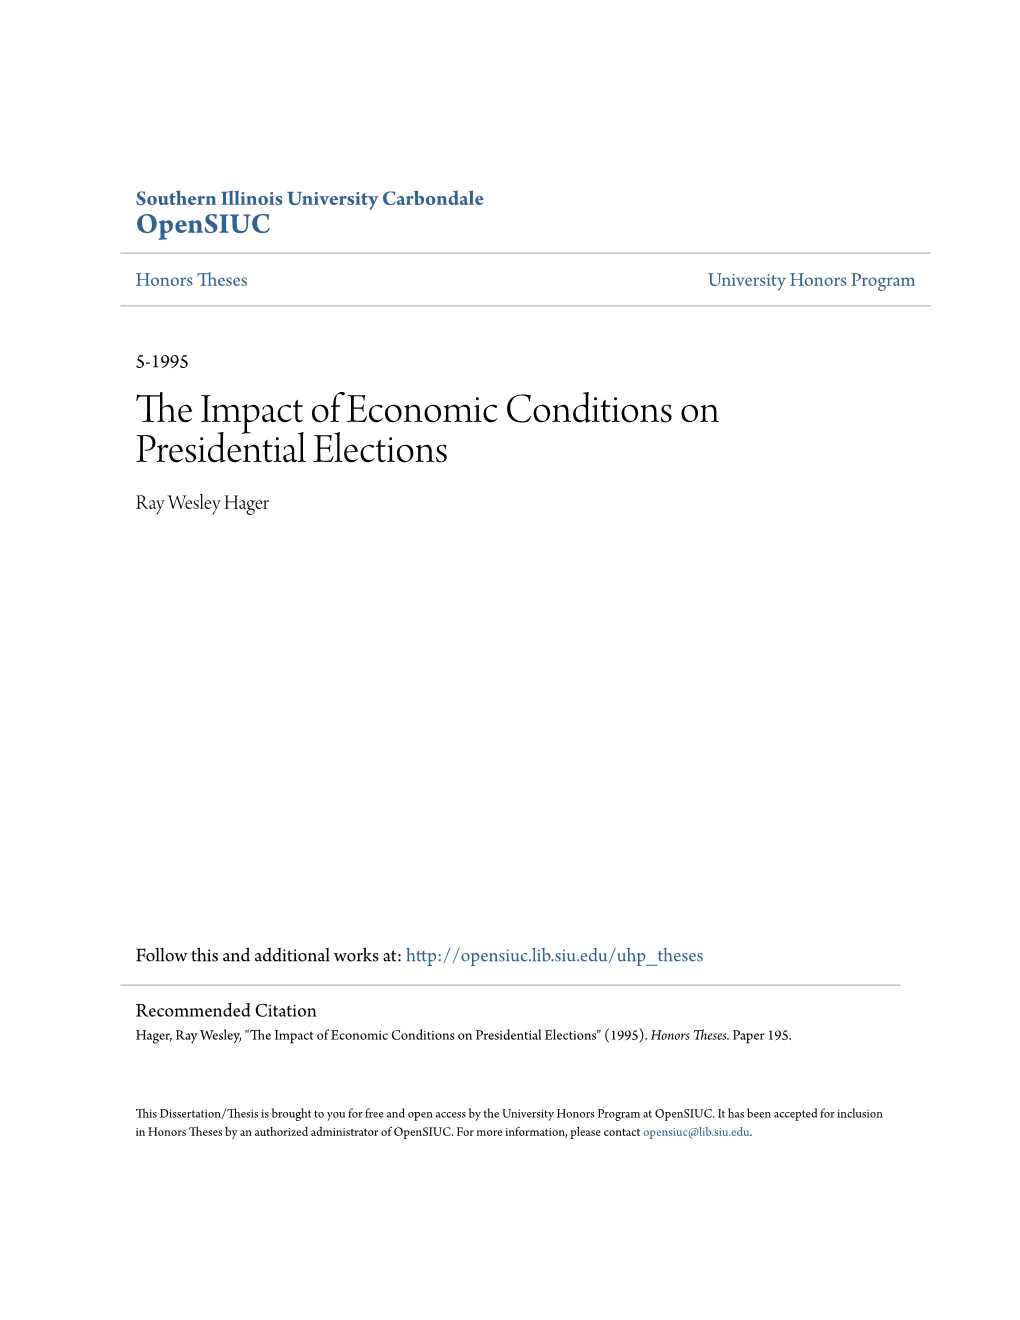 The Impact of Economic Conditions on Presidential Elections